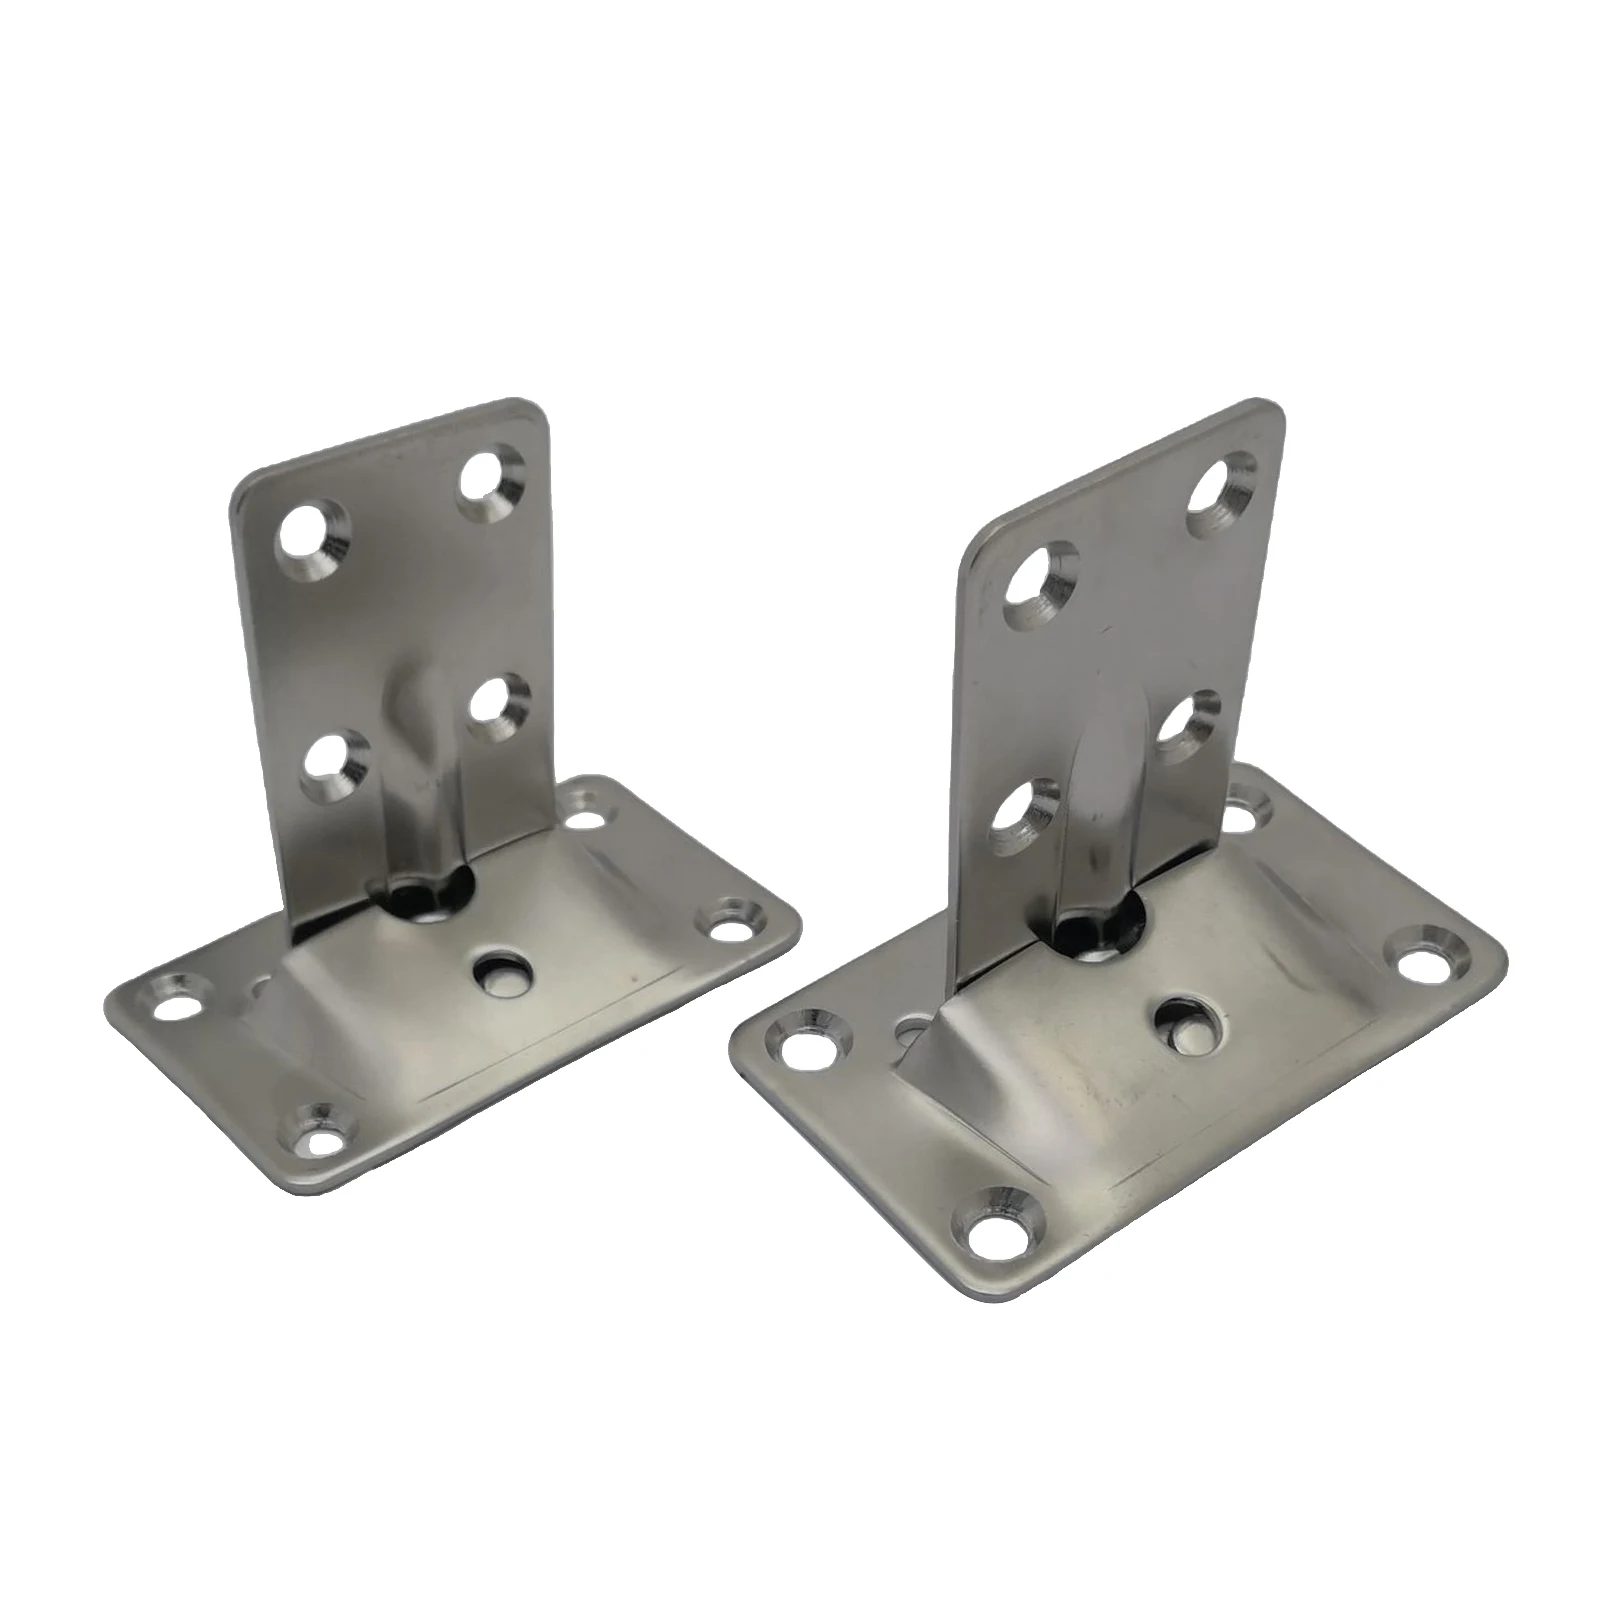 Marine Stainless Steel Table Bracket Set Removable Multiple Usage for House Boats Marine Accessories Hardware